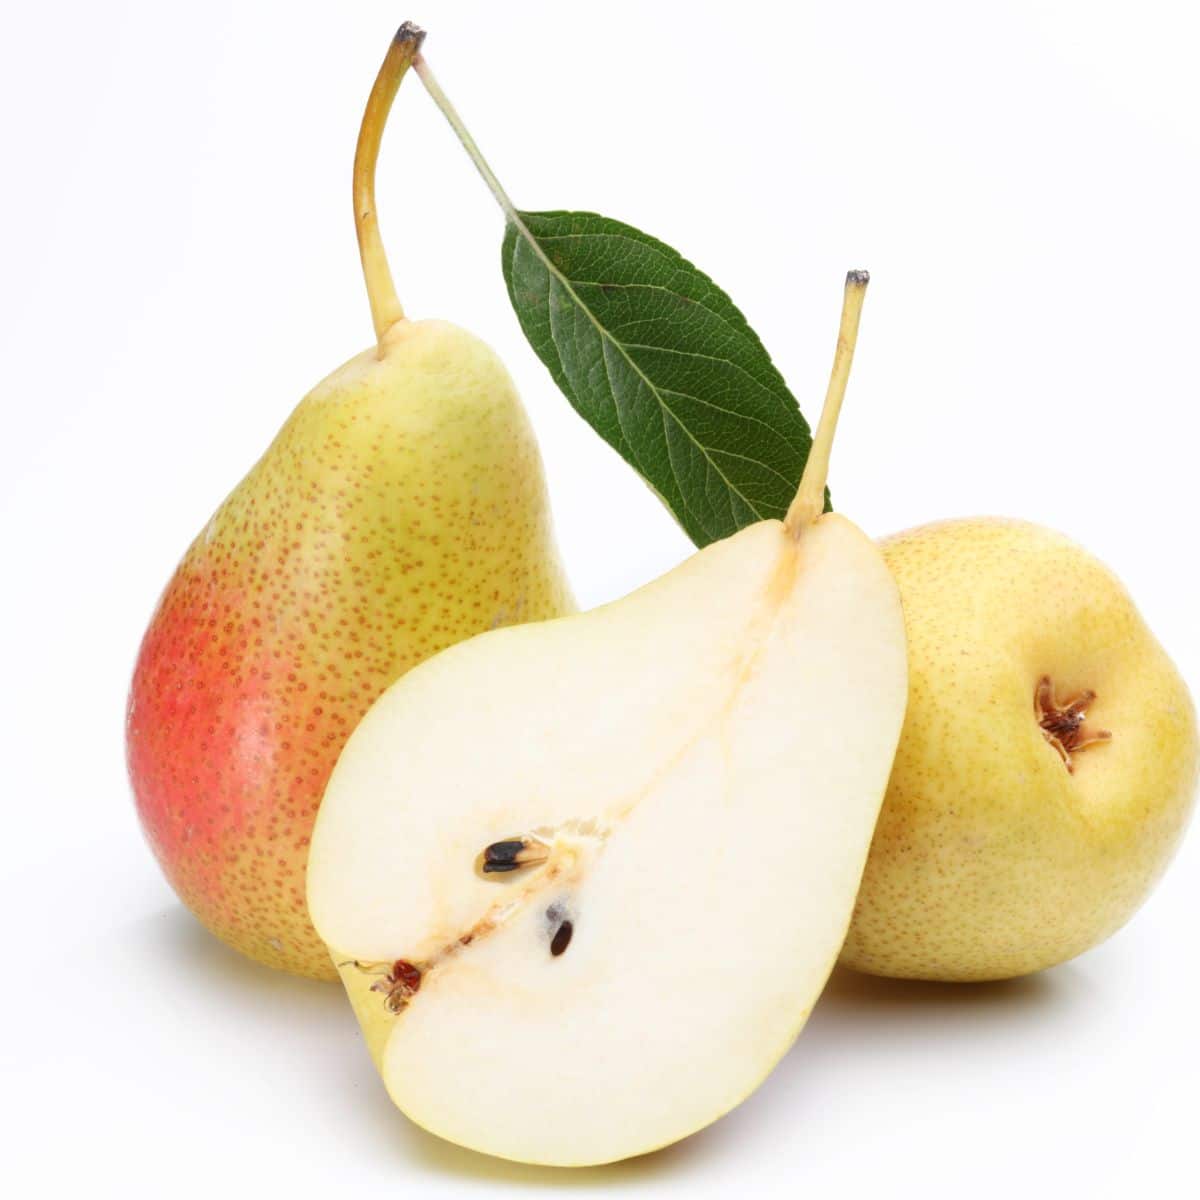 baldwin pears on a white background.